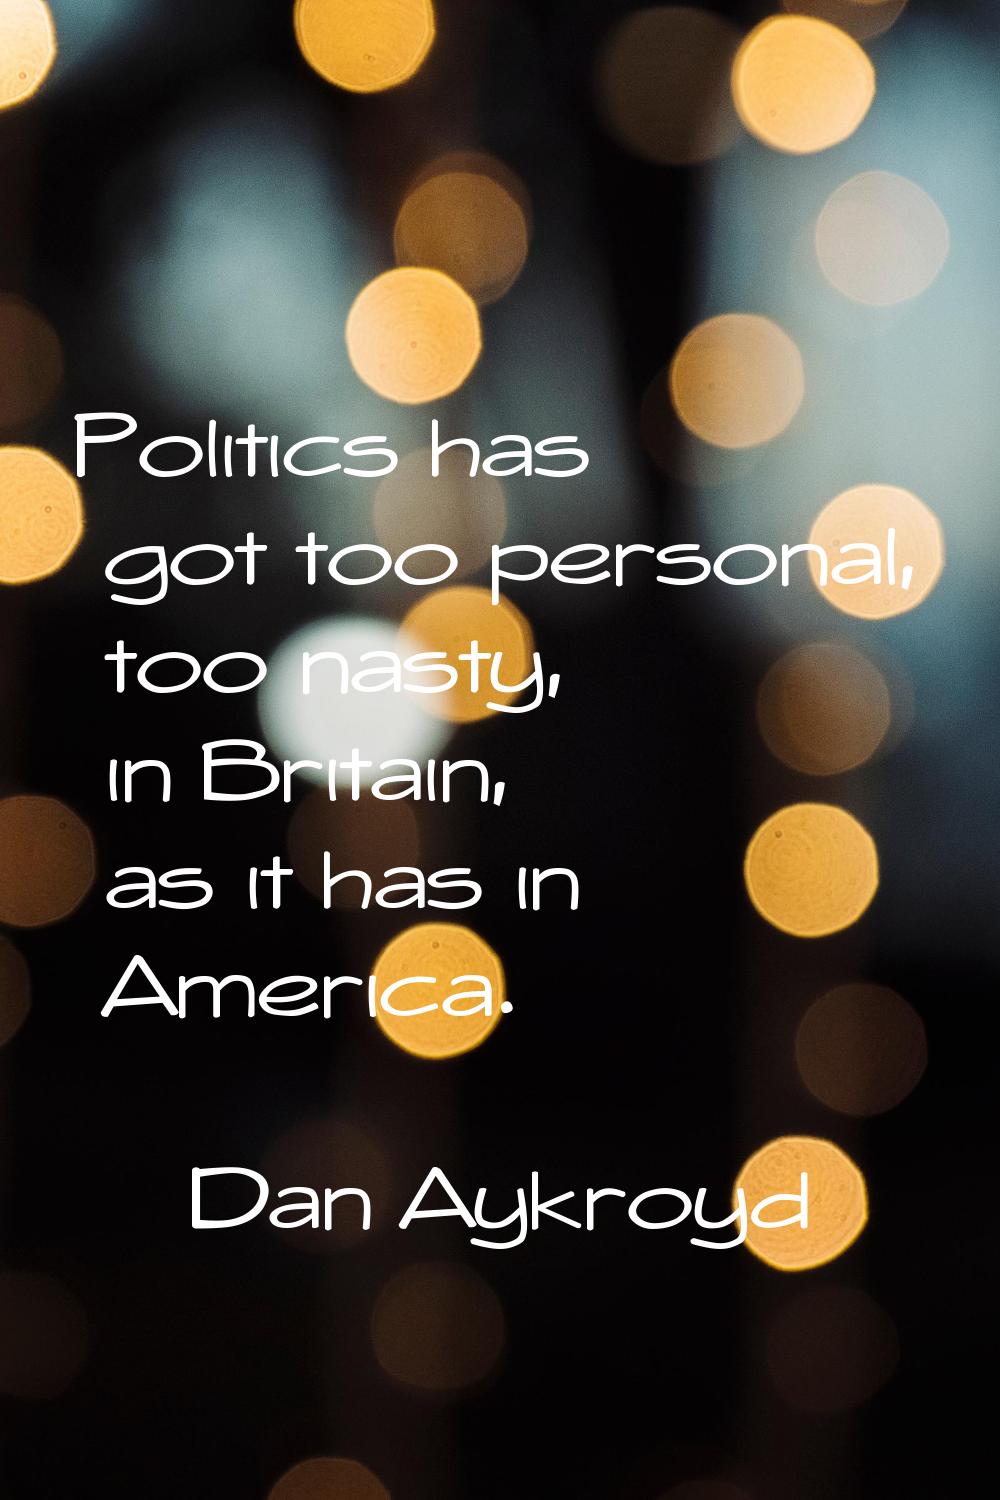 Politics has got too personal, too nasty, in Britain, as it has in America.